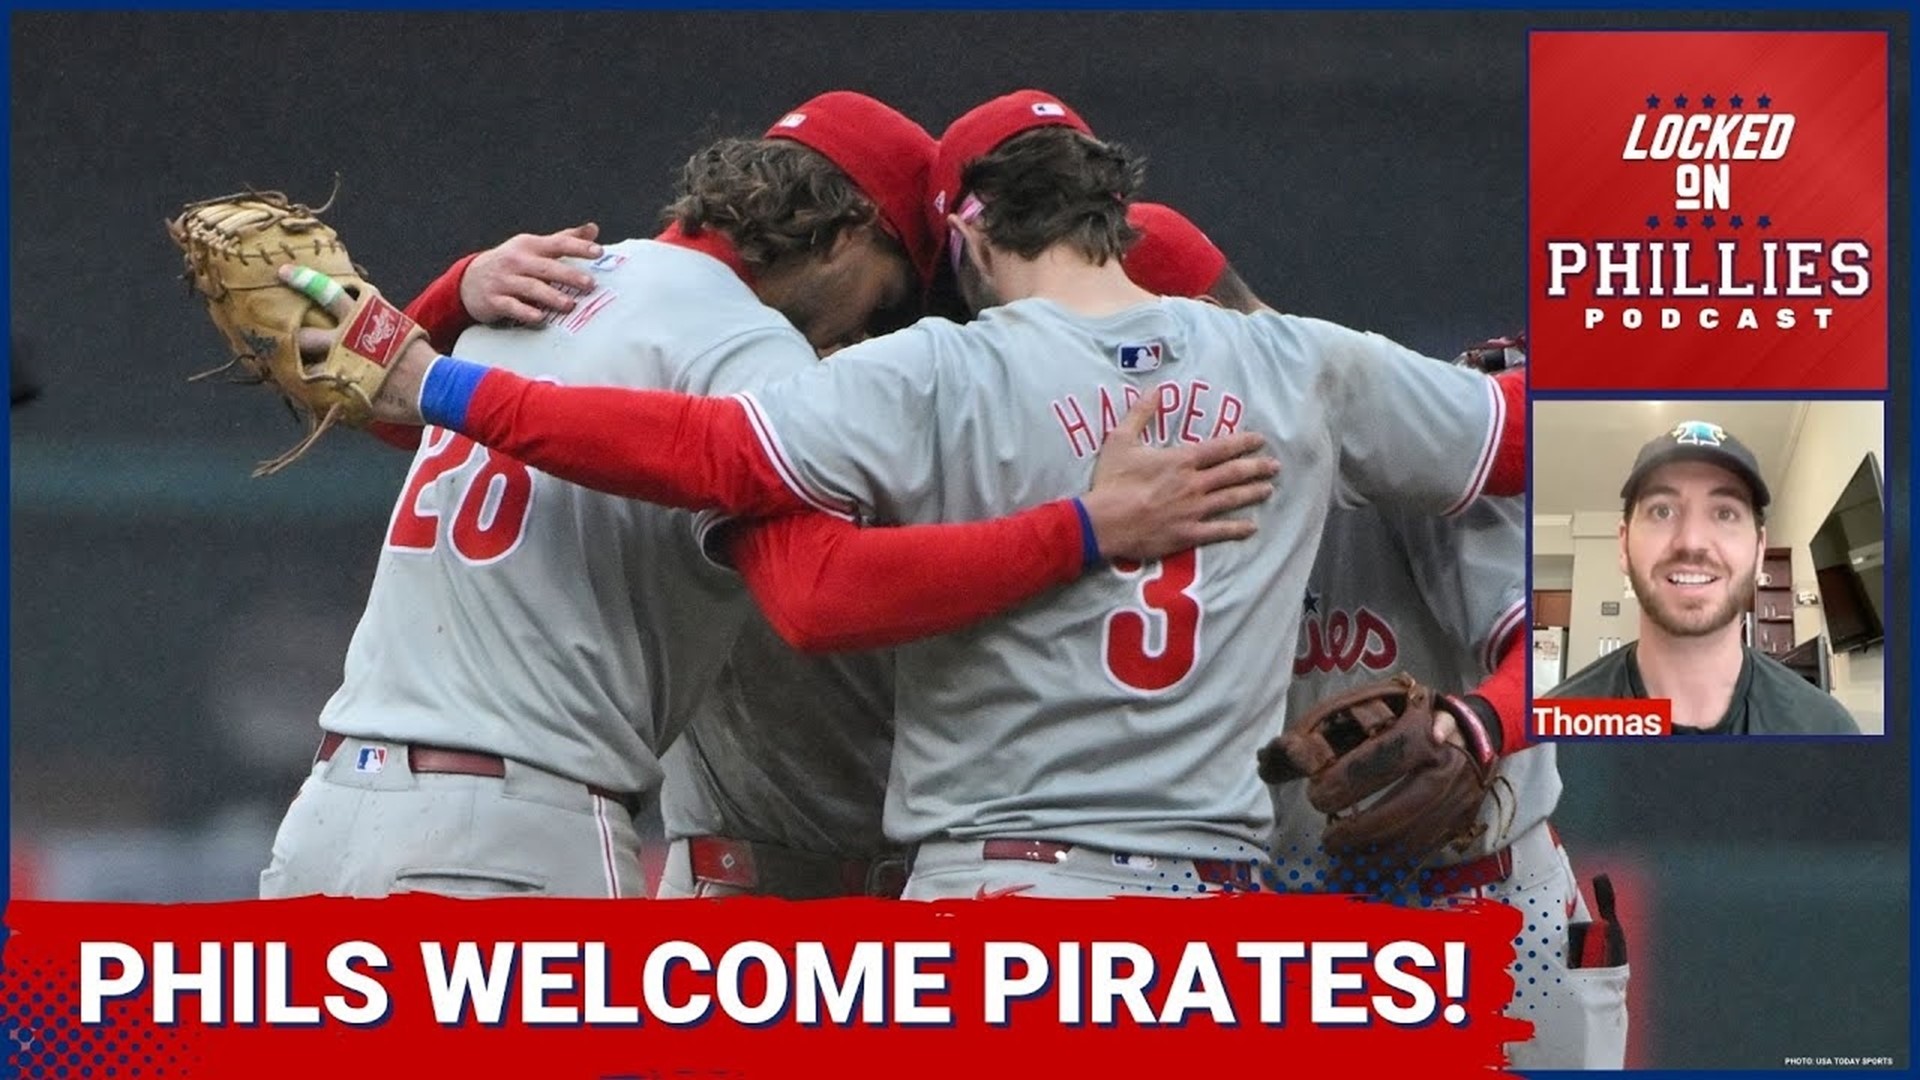 In today's episode, Connor previews the Philadelphia Phillies upcoming 4 game series with the Pittsburgh Pirates, and discusses the expectations for the matchup!